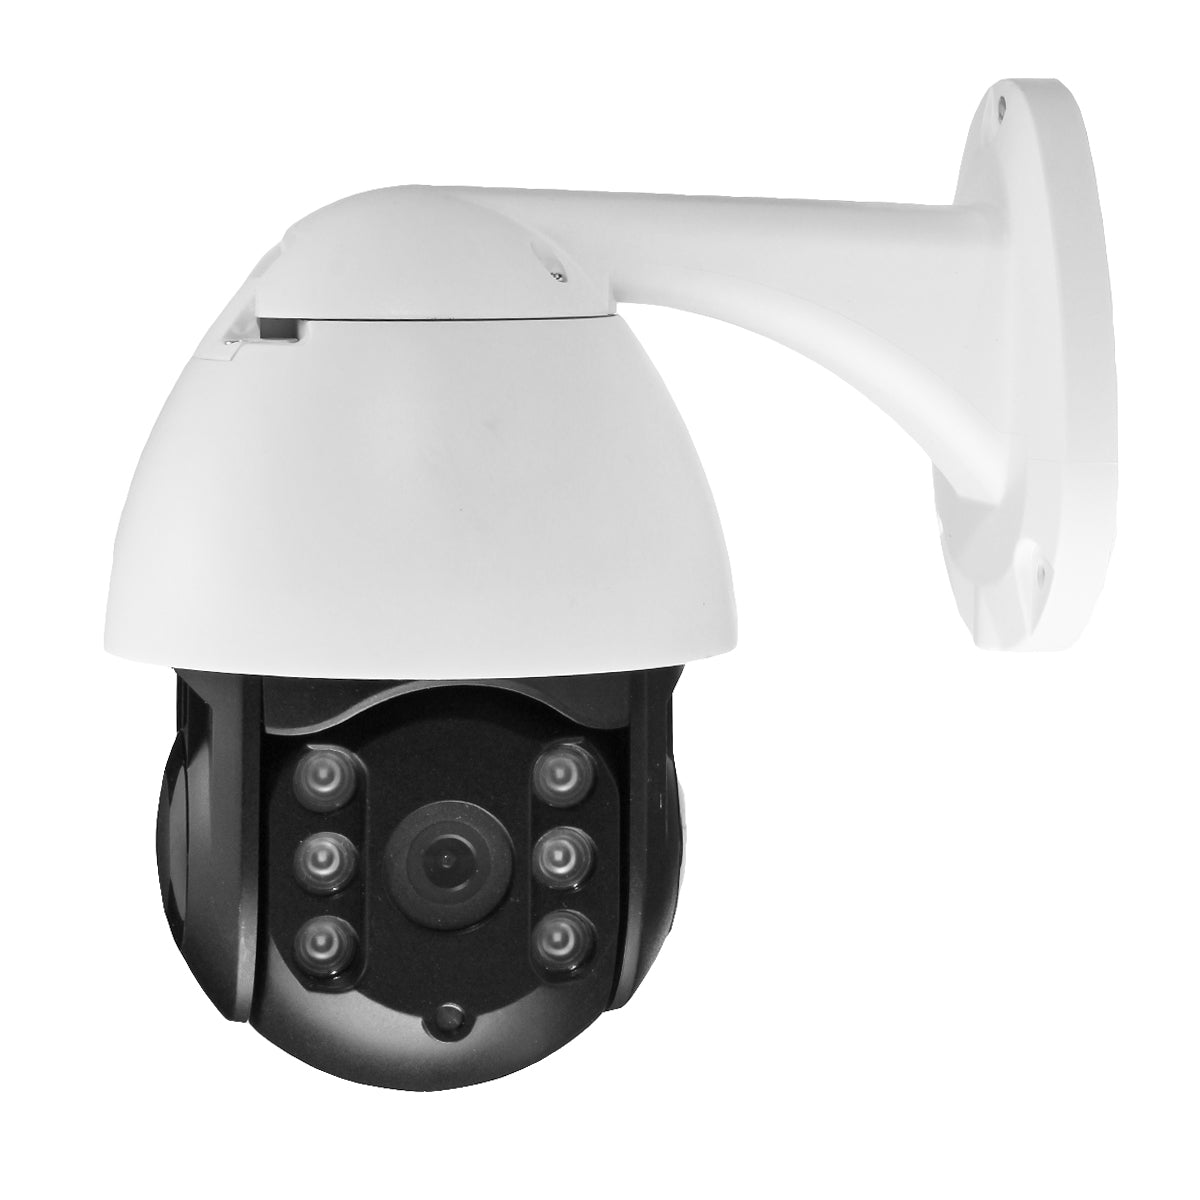 1080P 2.0MP WiFi Wireless PTZ Security IP Camera Outdoor Waterproof Monitor Night Vision